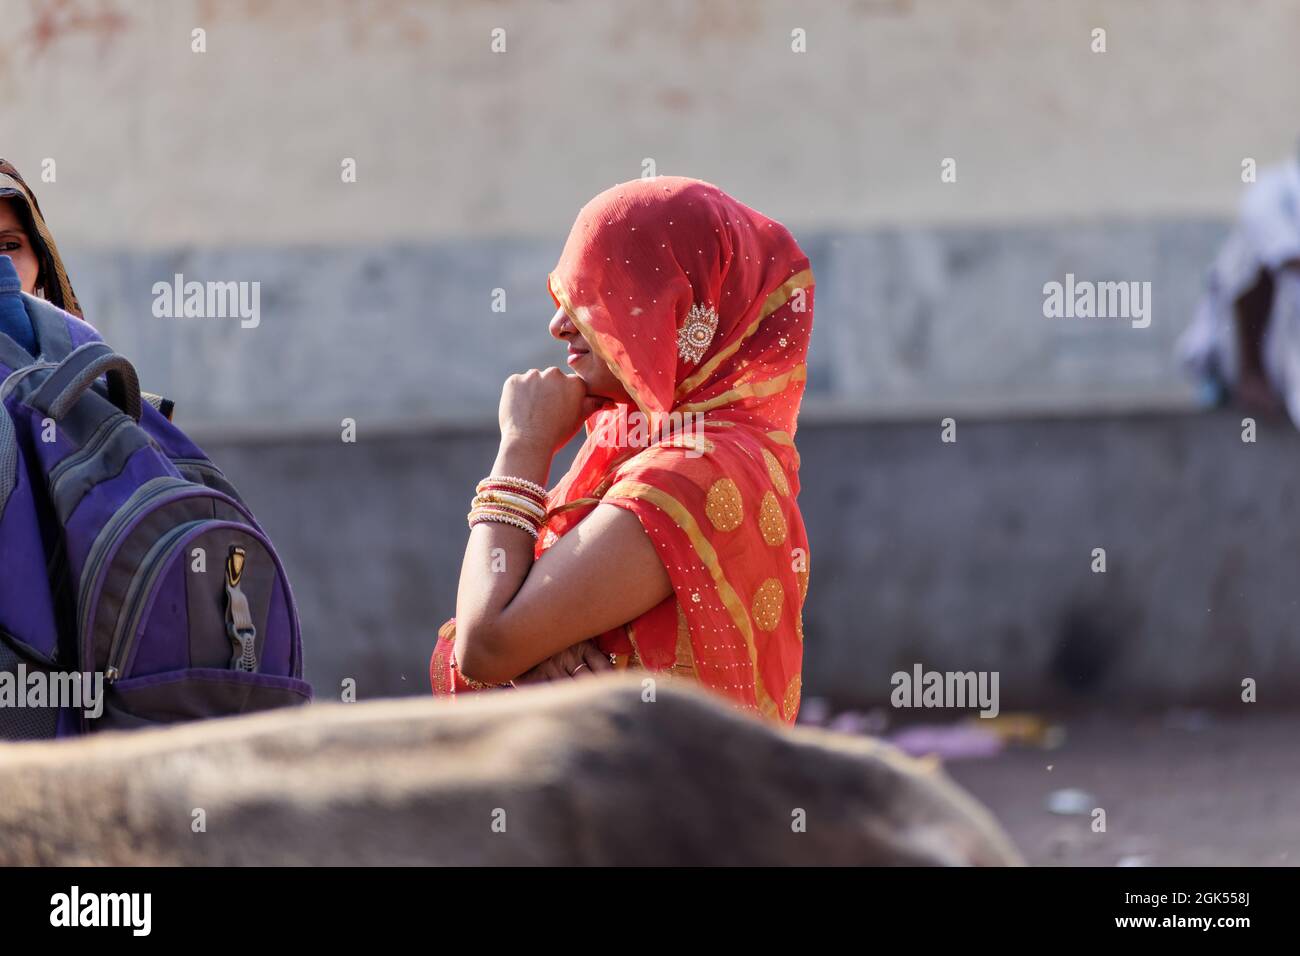 Orchha, Madhya Pradesh, India - March 2019: A candid portrait of an Indian woman dressed in a traditional red sari with a veil. Stock Photo